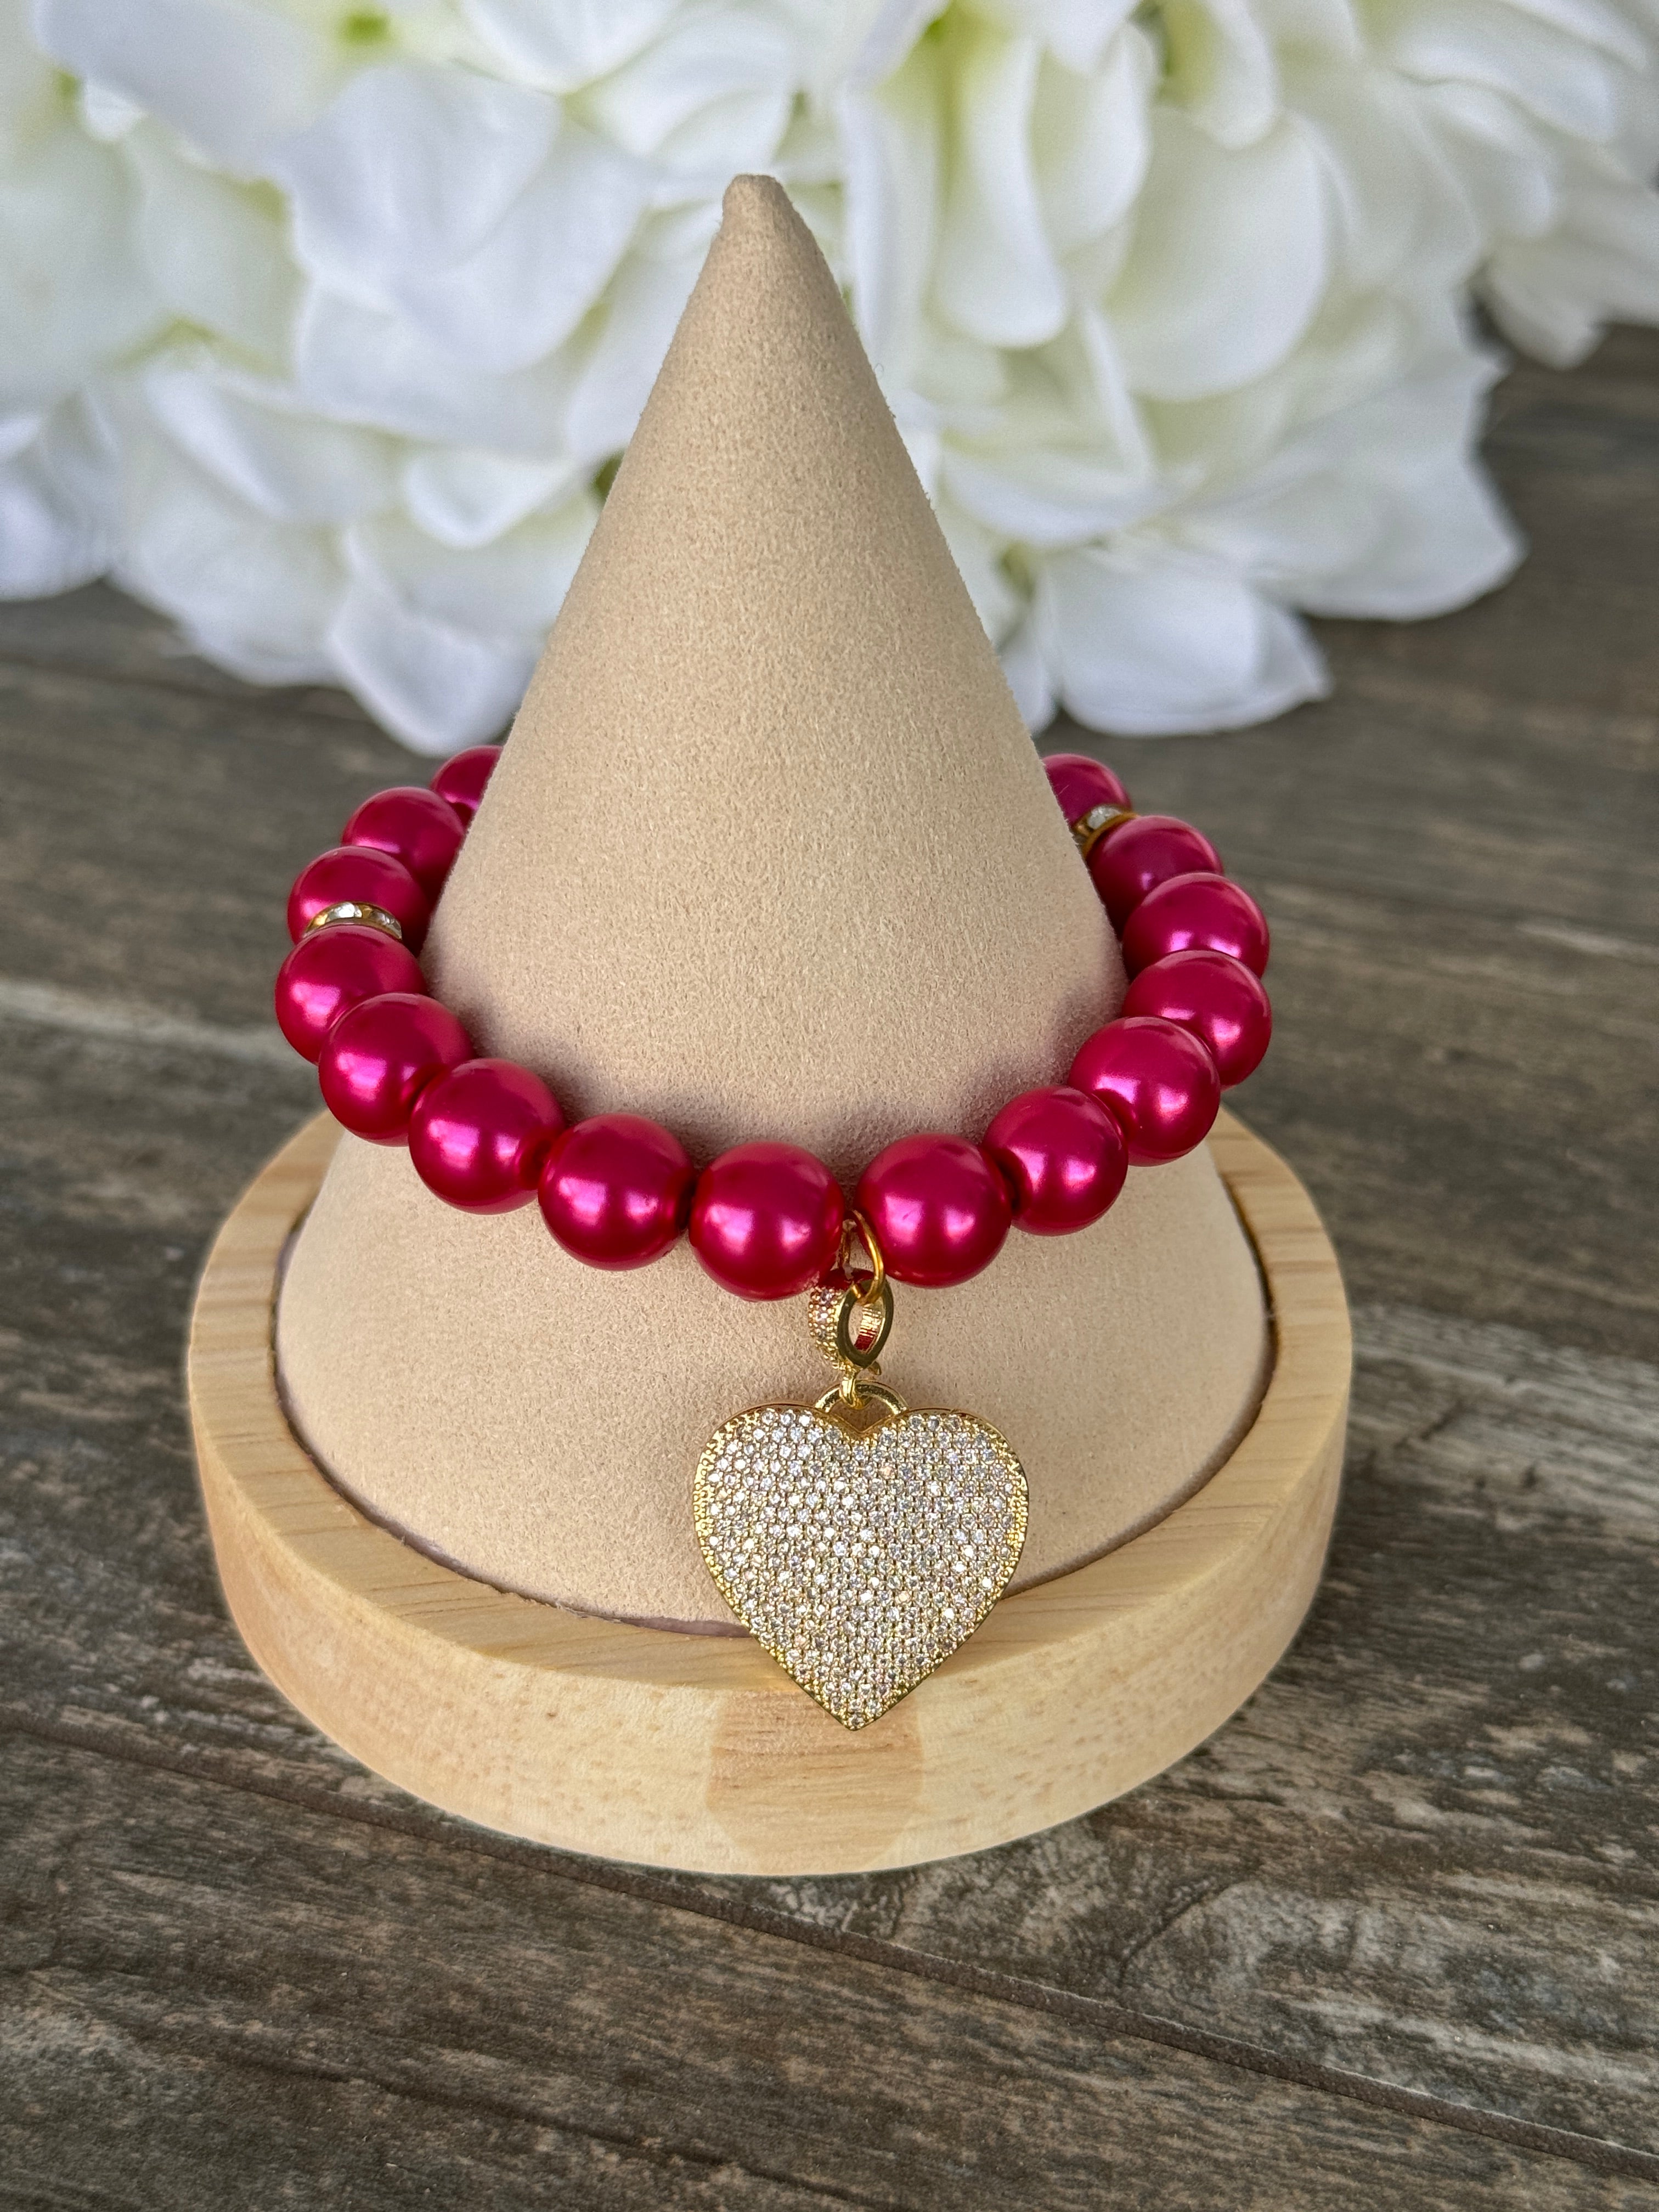 The Pearl Pave Heart Bracelet